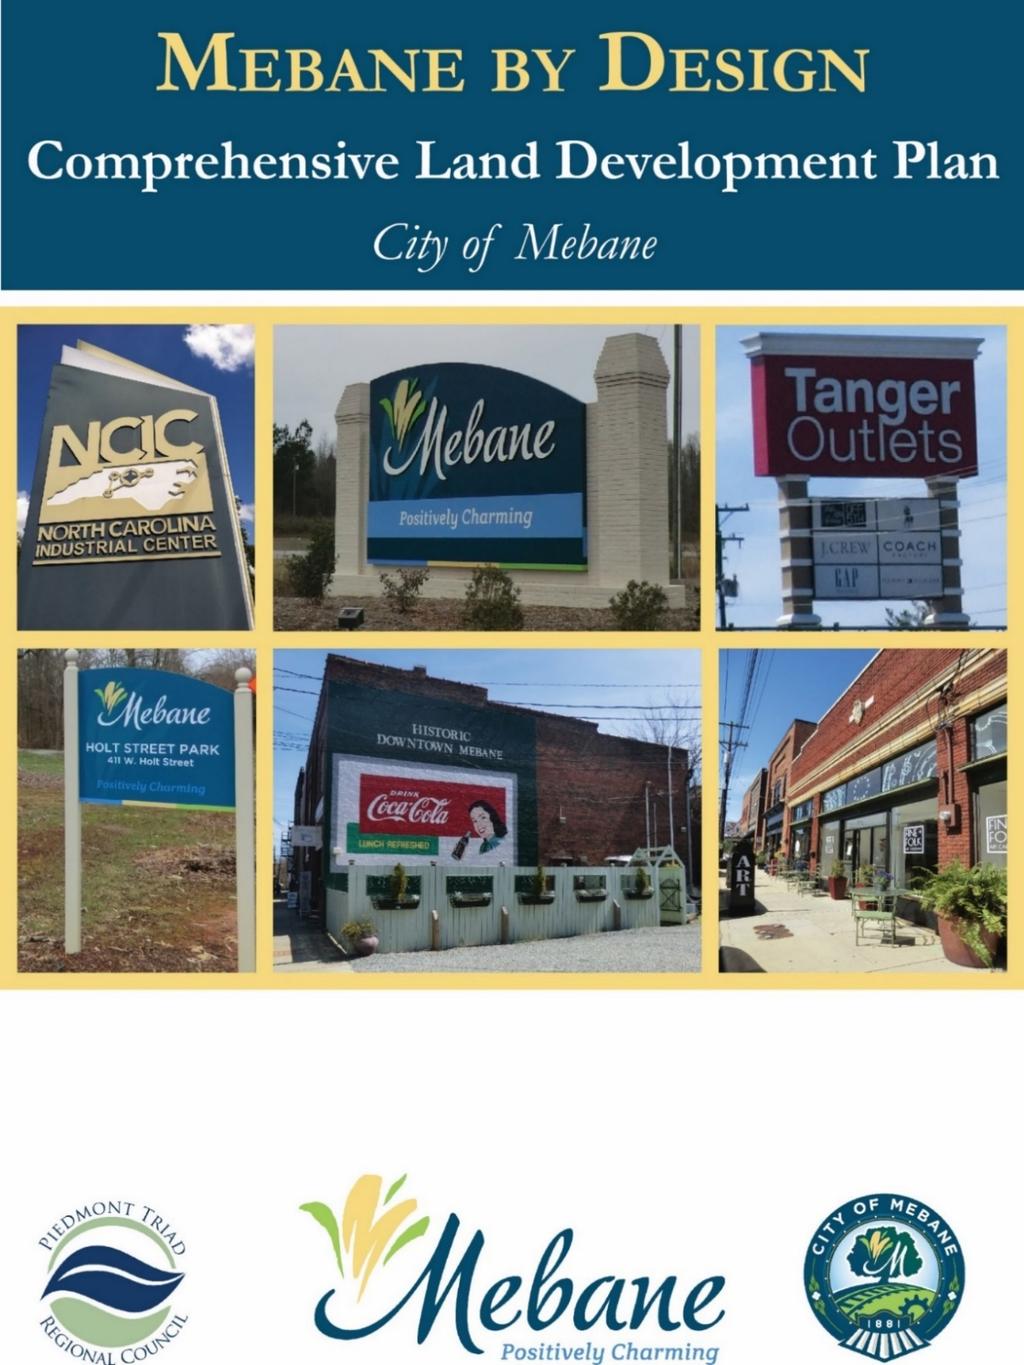 Executive Summary P URPOSE AND O RGANIZATION OF THE P LAN The City of Mebane, with input from citizens and an appointed CLP Advisory Committee, adopted Mebane by Design, a Comprehensive Land